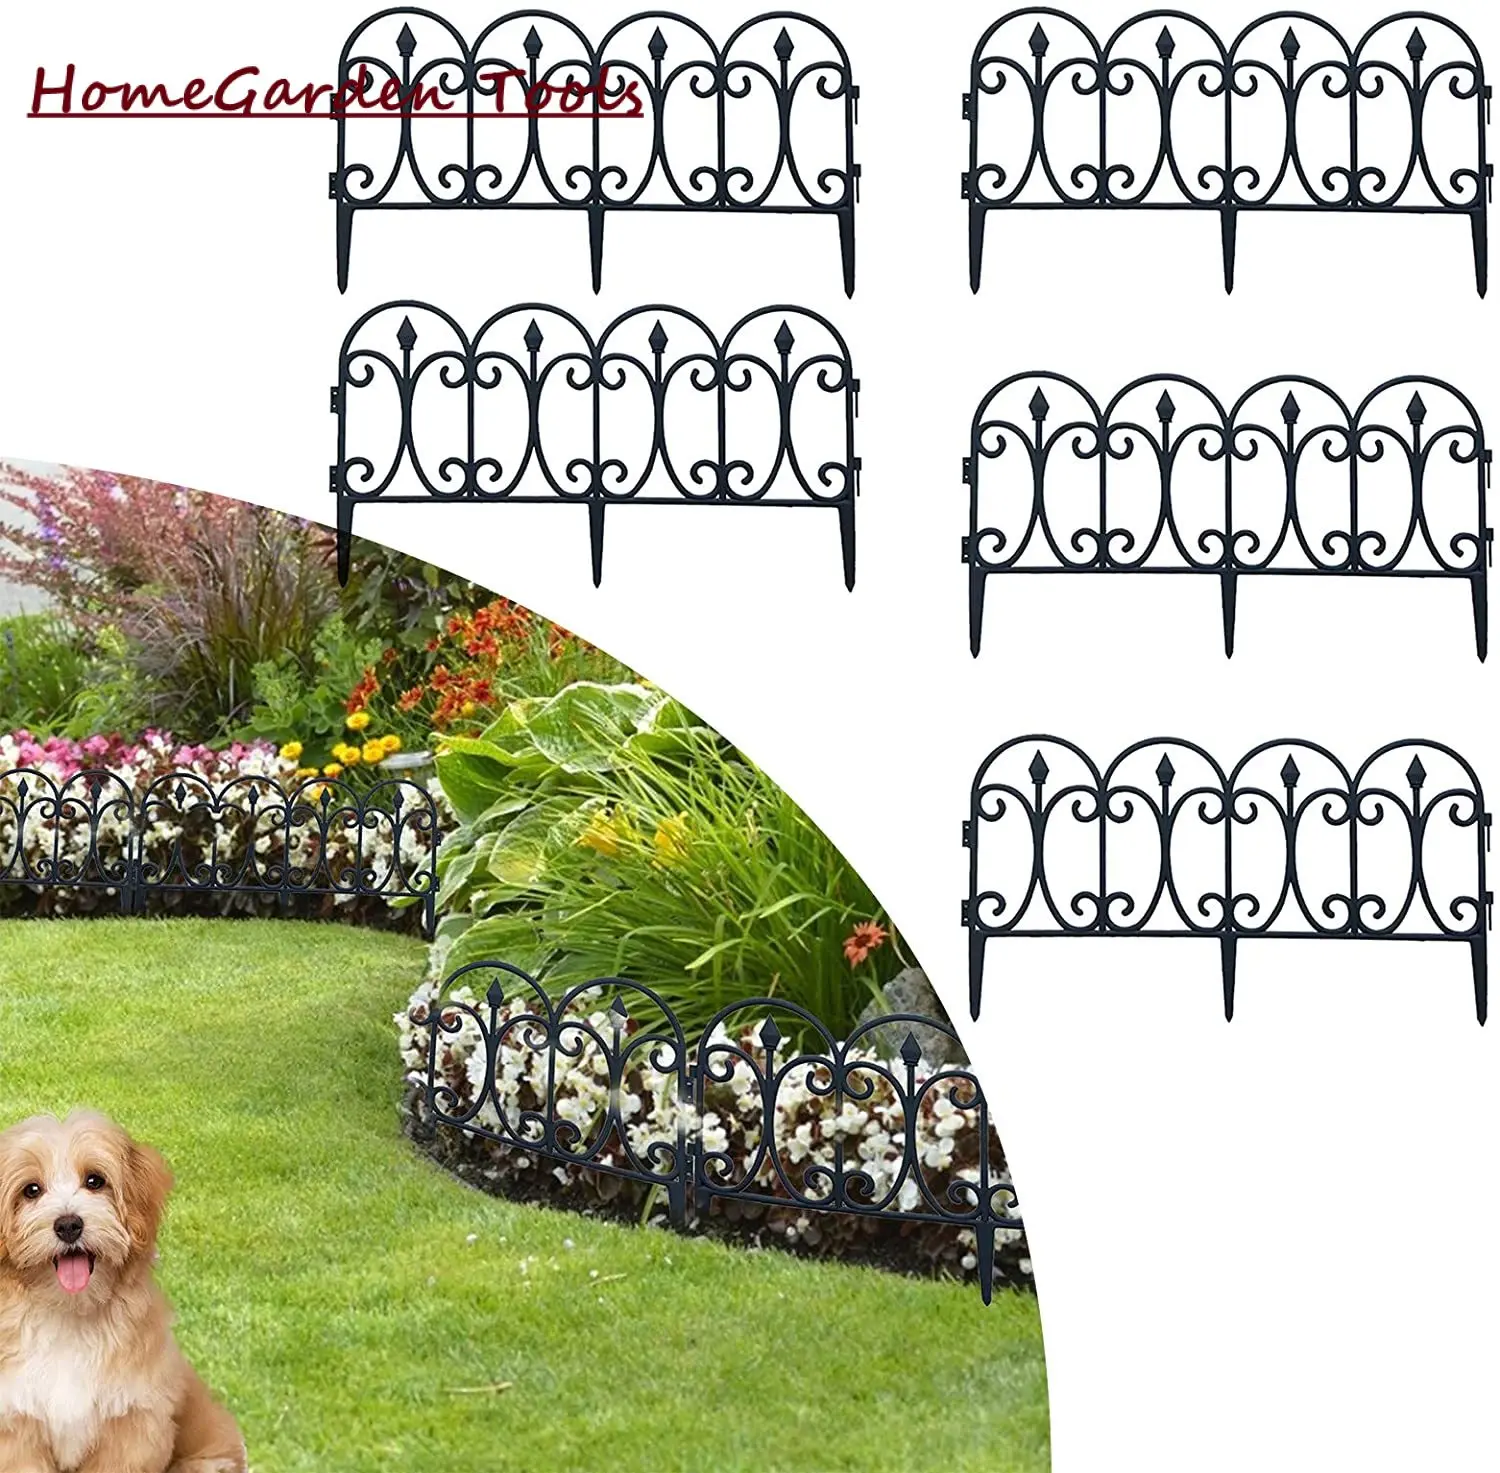 Fencing Patio Wire Border Black Metal Landscape Wire Folding Decorative Garden Fence for Flower Bed Dog Barrier Tall Garden Edge